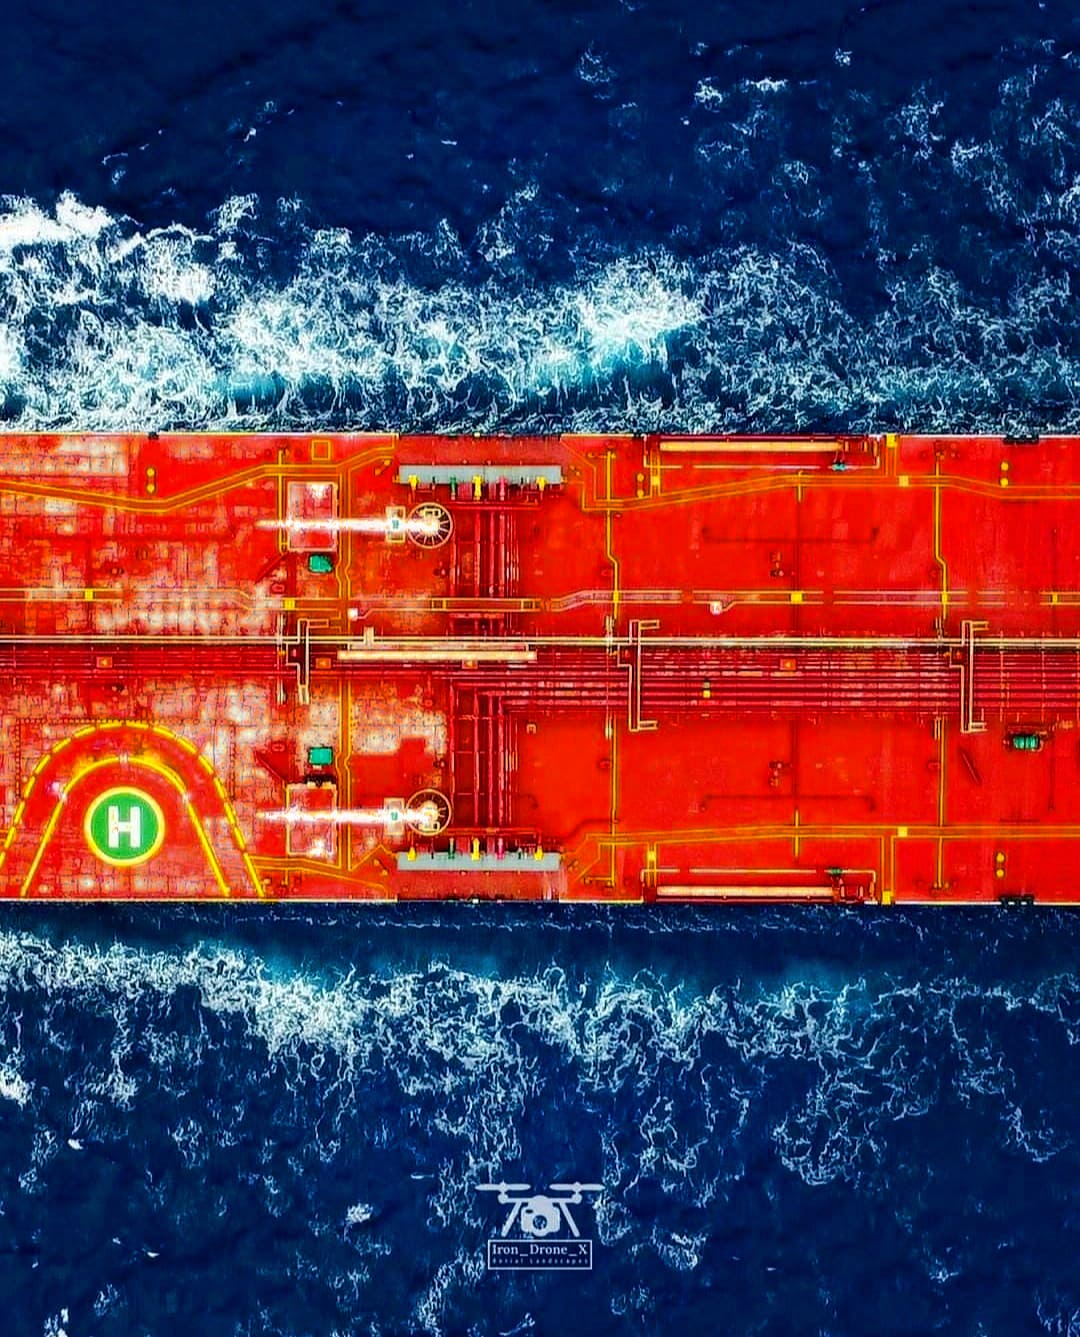 2. Oil tanker underway  Credits to Iron Drone X